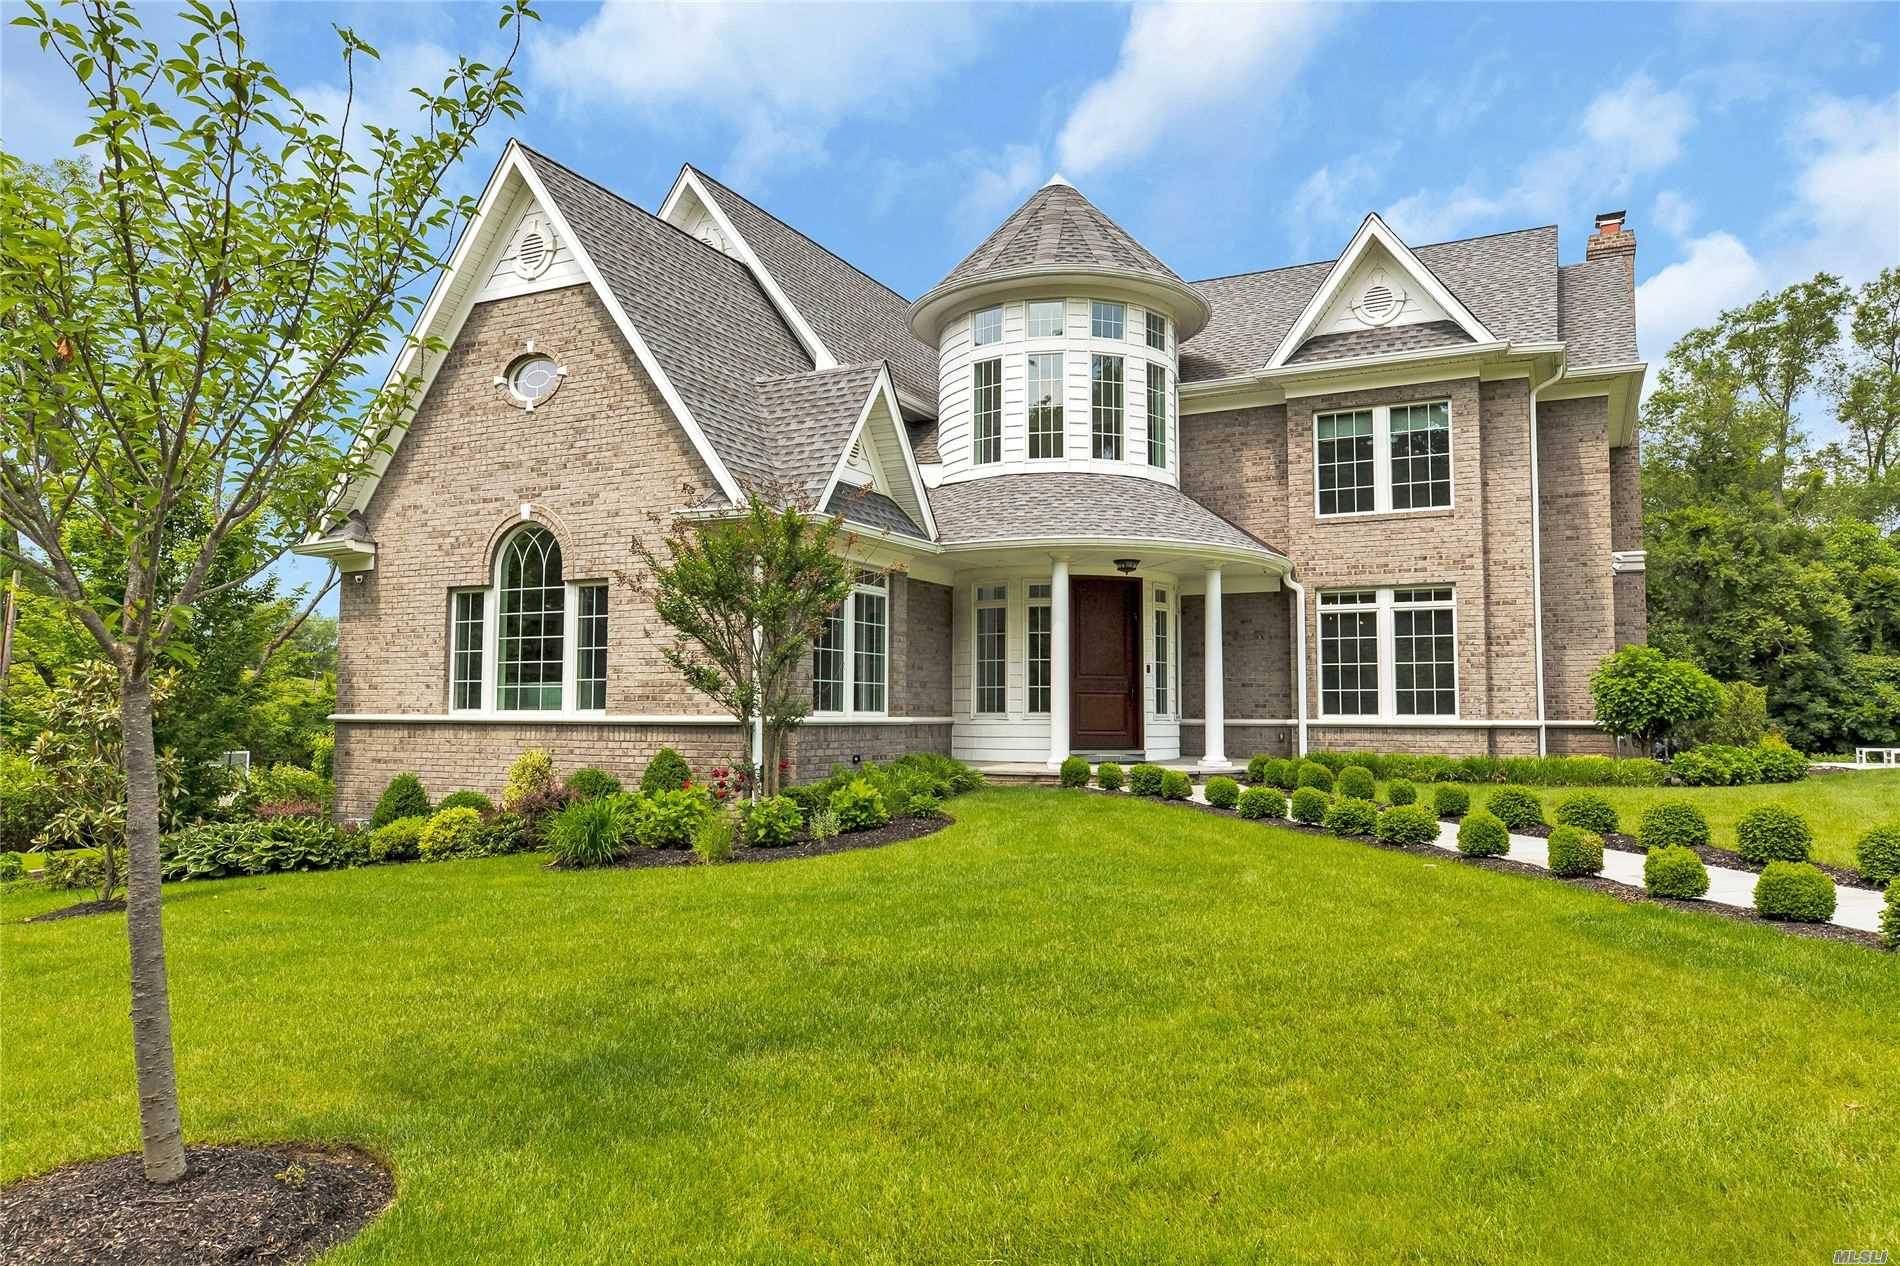 Showcase of Distinguished Homes TM presents this elegant home built in 2015.